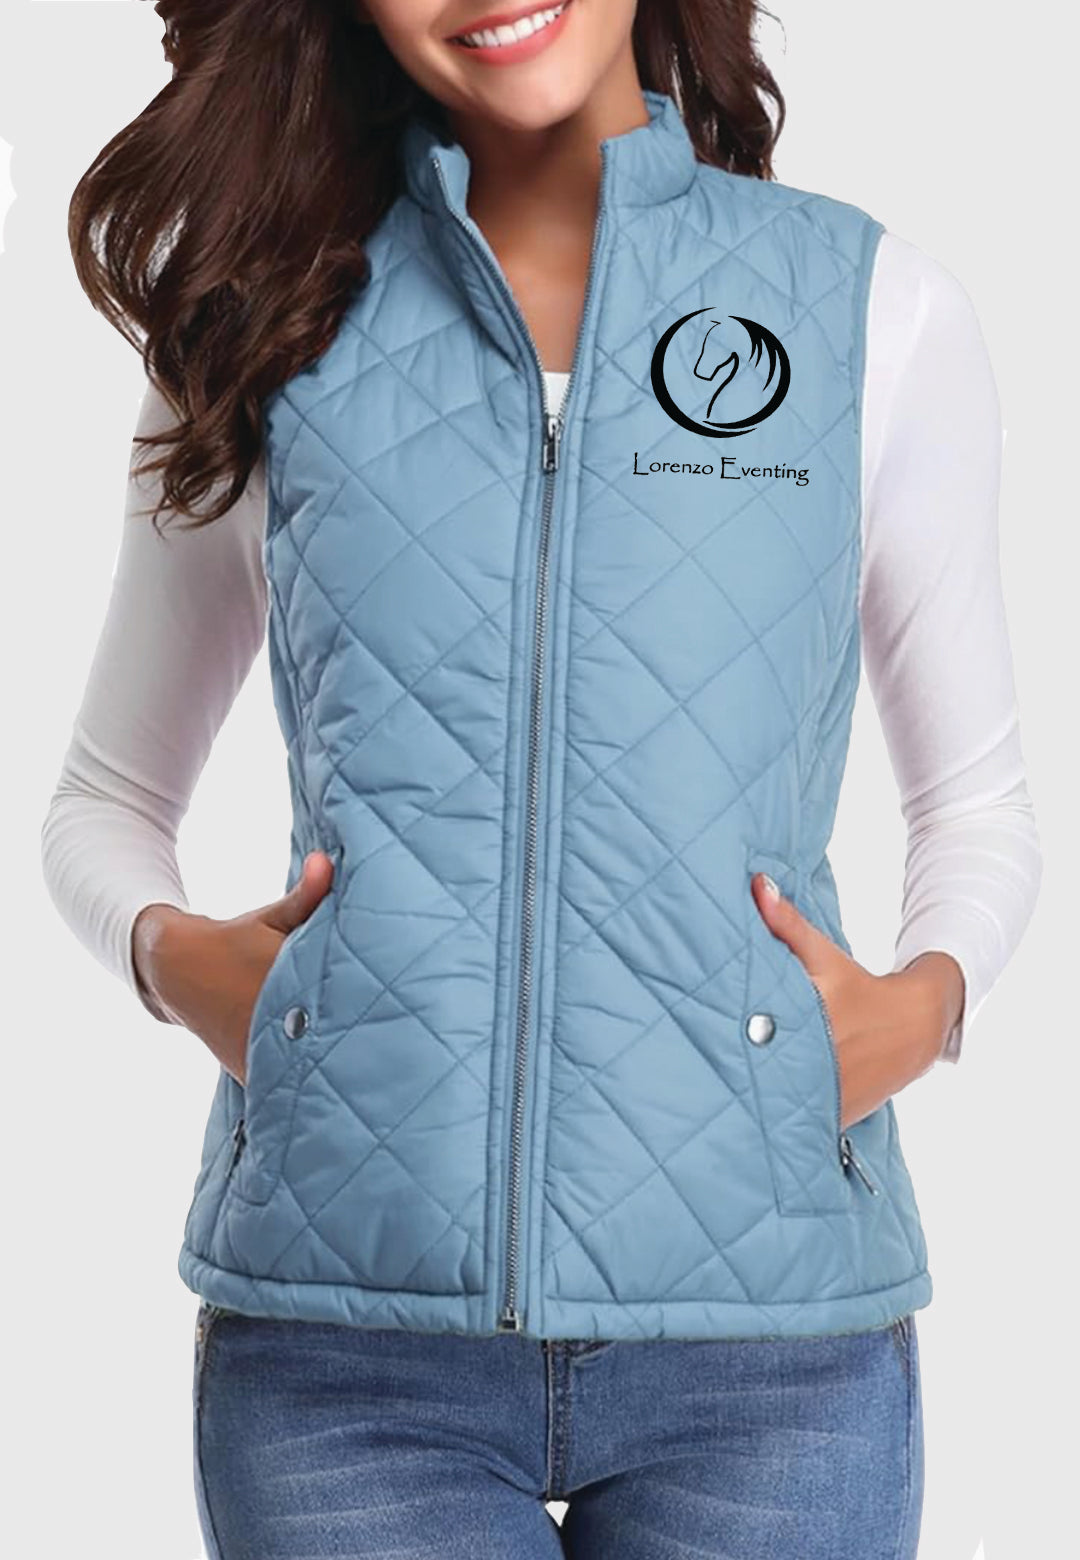 Lorenzo Eventing Fuinloth Women's Quilted Vest, 2 Color Options